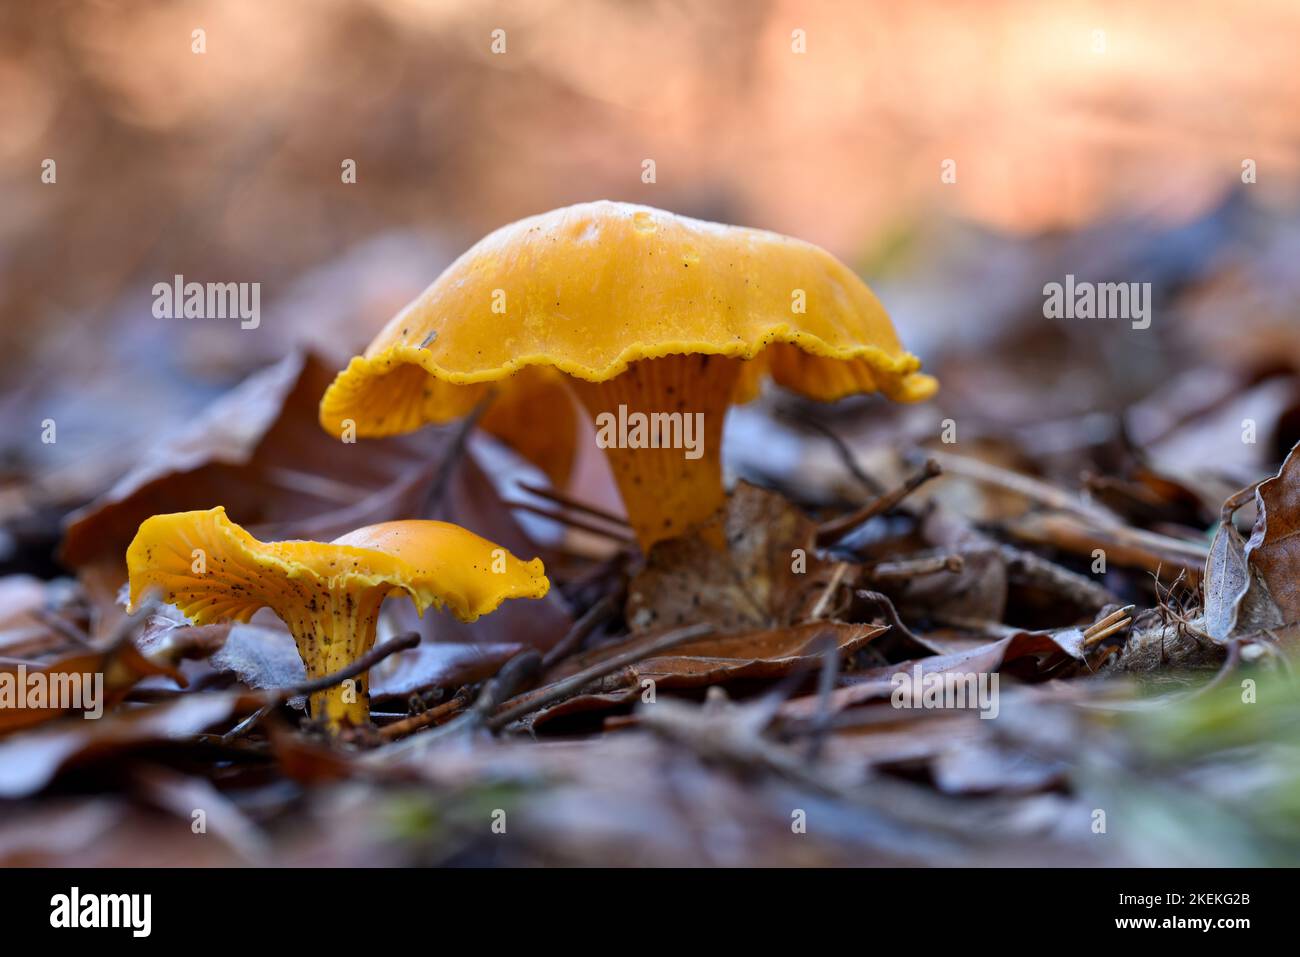 Close up image of a pair of Chanterelle mushrooms growing wild in a forest taken from ground level. Stock Photo